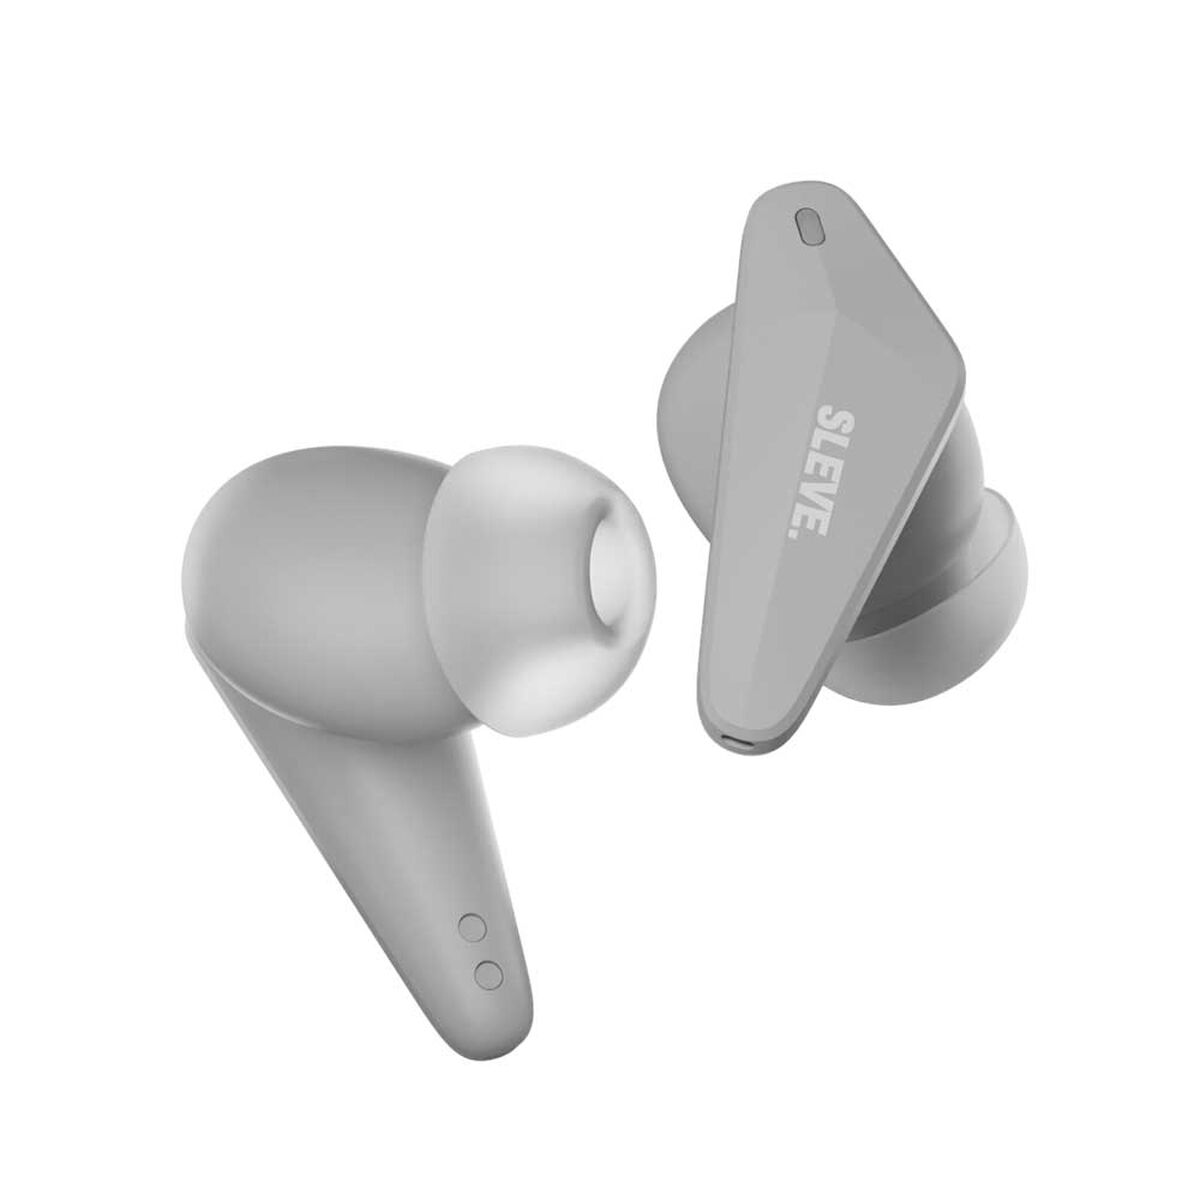 Audífonos Bluetooth In Ear Sleve Mobile X Pods Silver